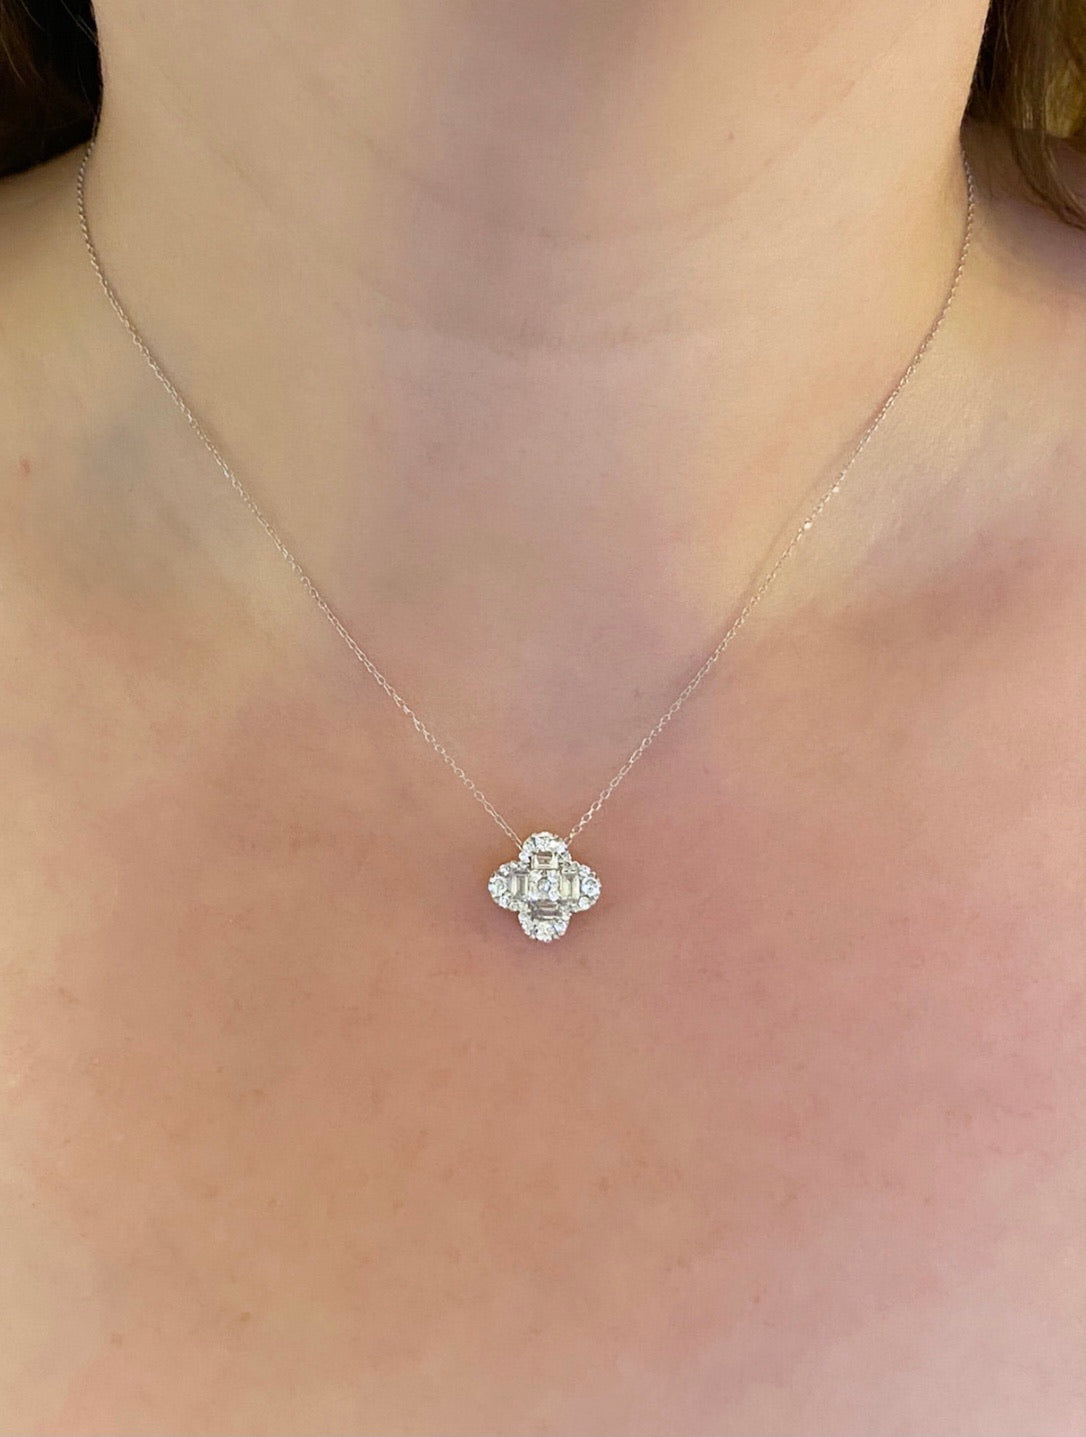 The Royal Clover Necklace